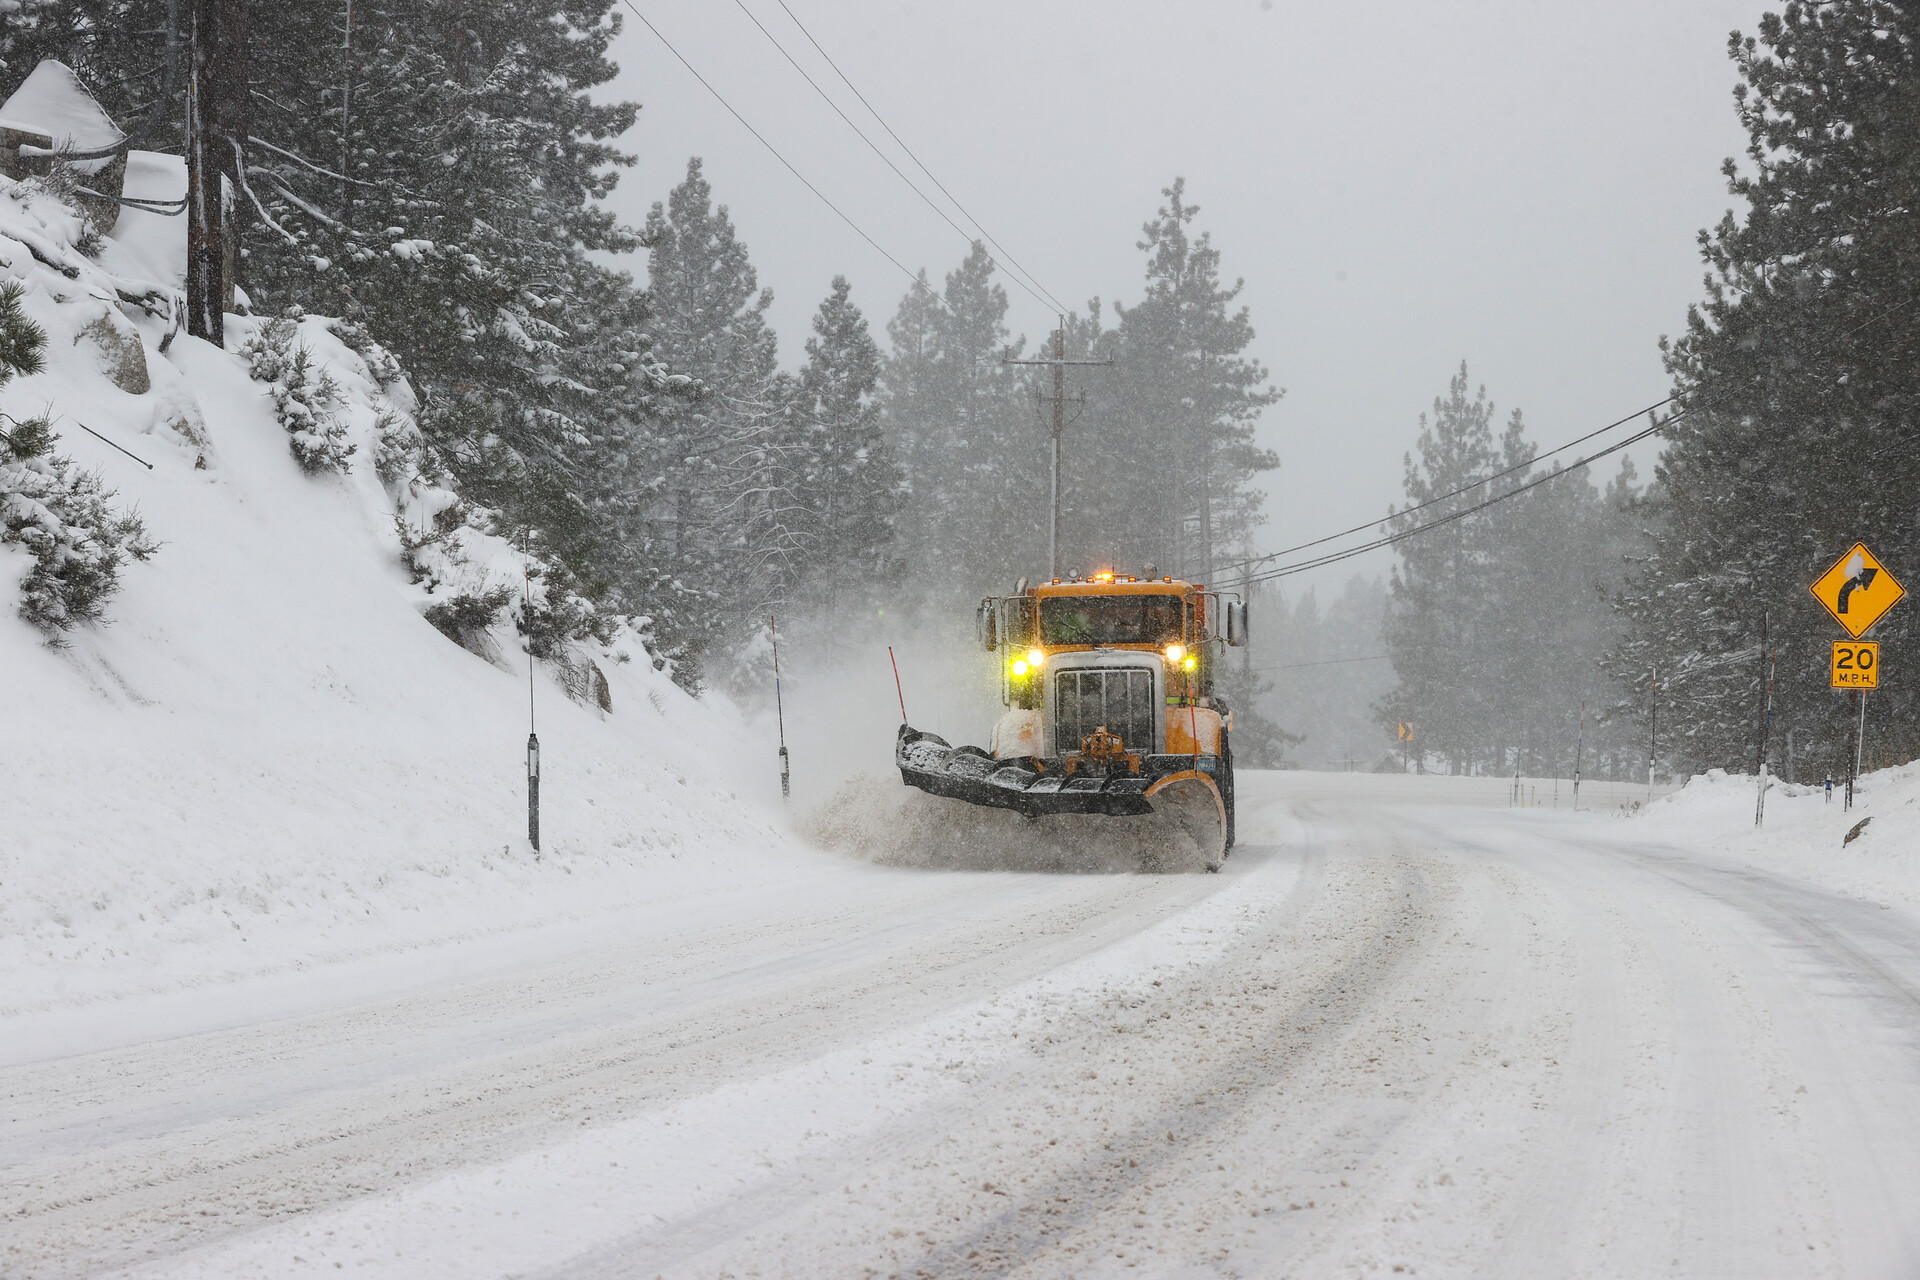 A mostly white photo, of a two-lane road covered in white and gray snow, penned in by snowy embankments on both sides with conifers, and an orange truck with bright yellow headlights clearing the road on the left side, facing the camera.